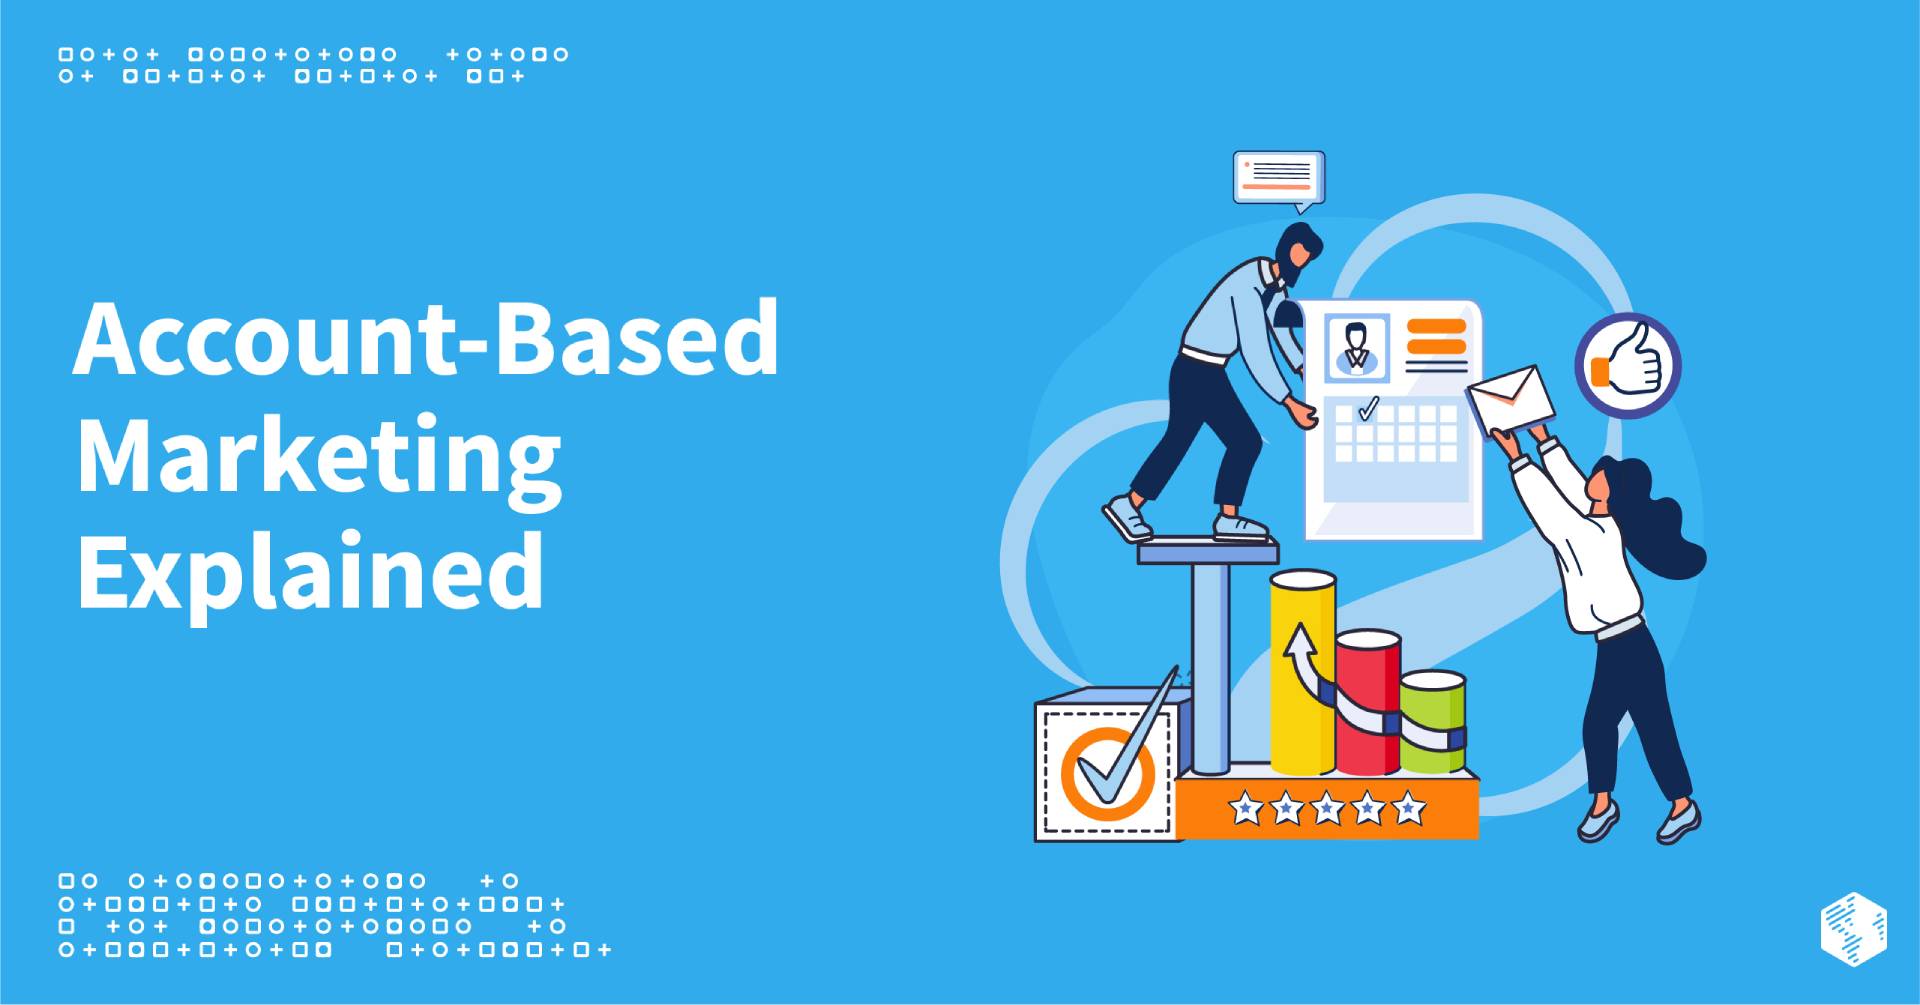 How to Implement Account-Based Marketing for B2B Businesses